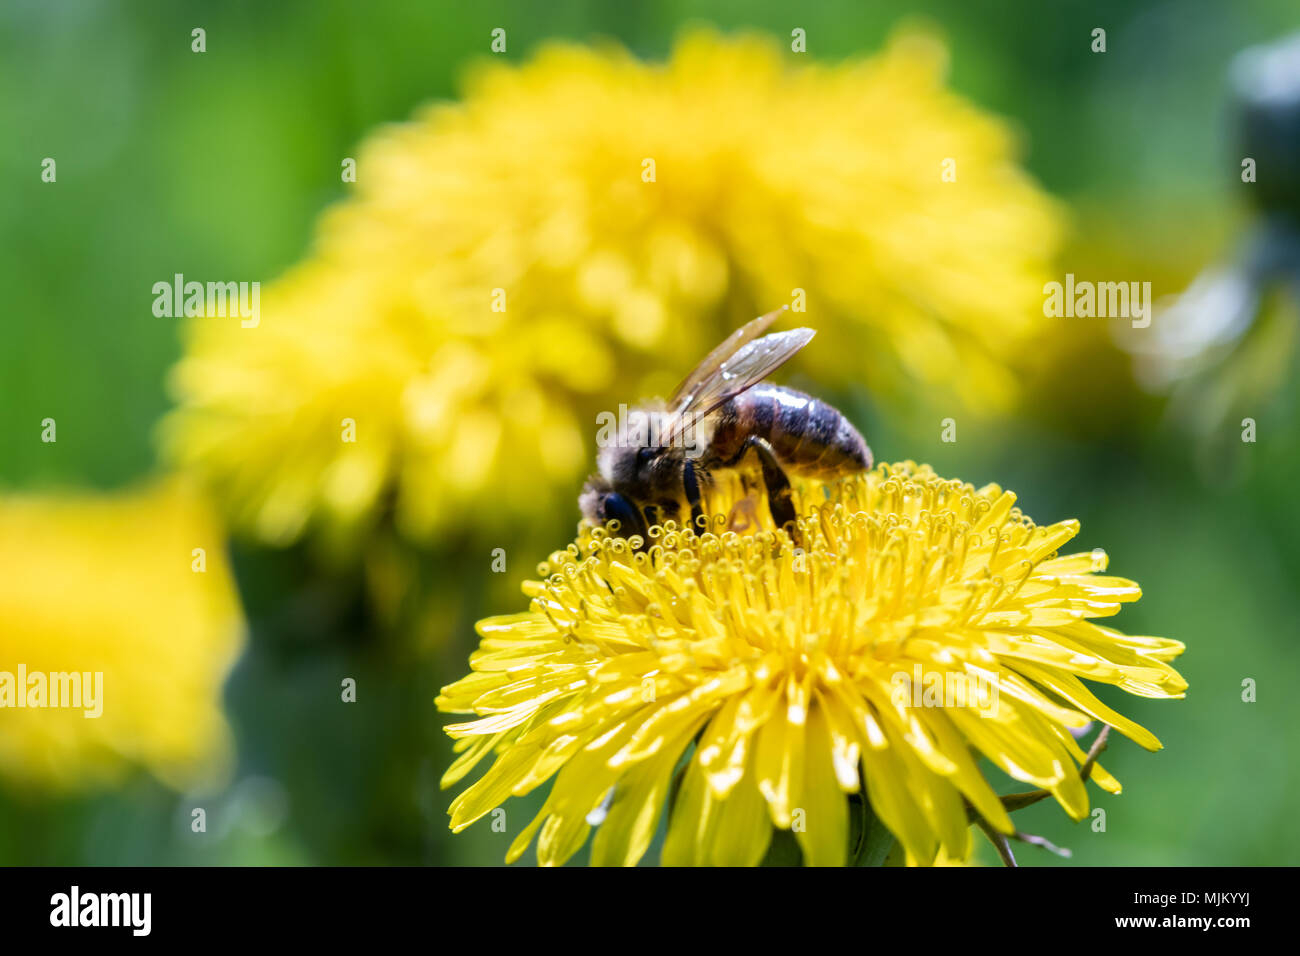 Working bee collecting pollen from a yellow dandelion. Close up macro view Stock Photo